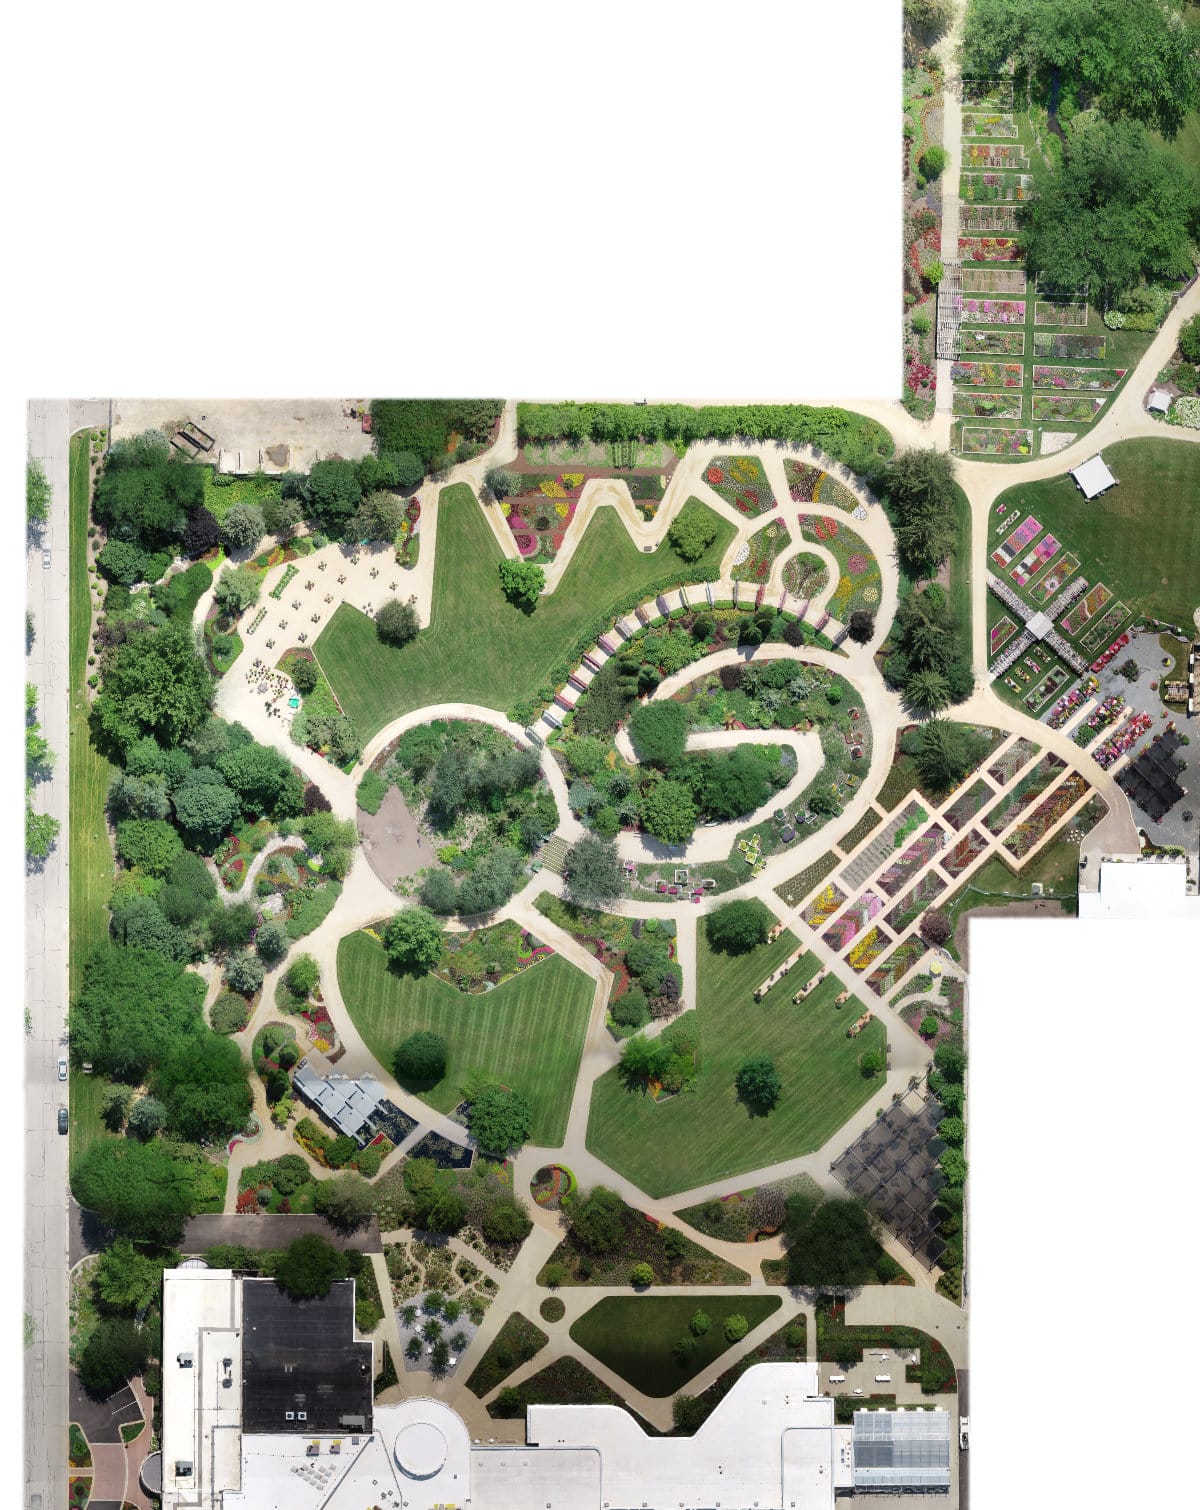 The Gardens at Ball (aerial view)